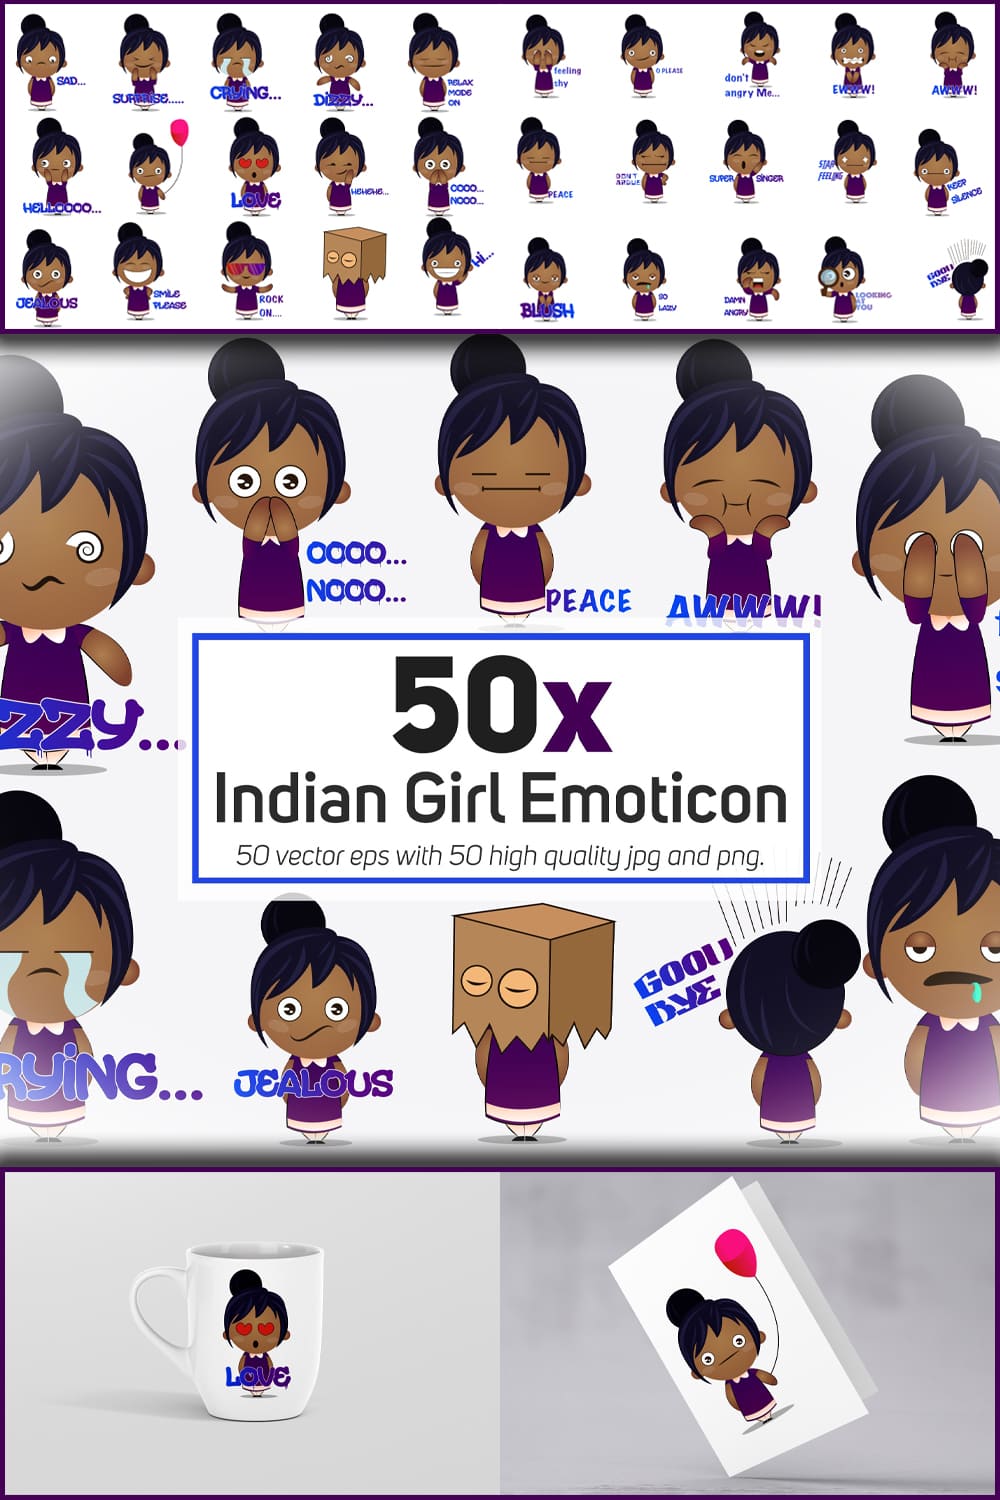 Indian girl emoticon or stickers character col of pinterest.